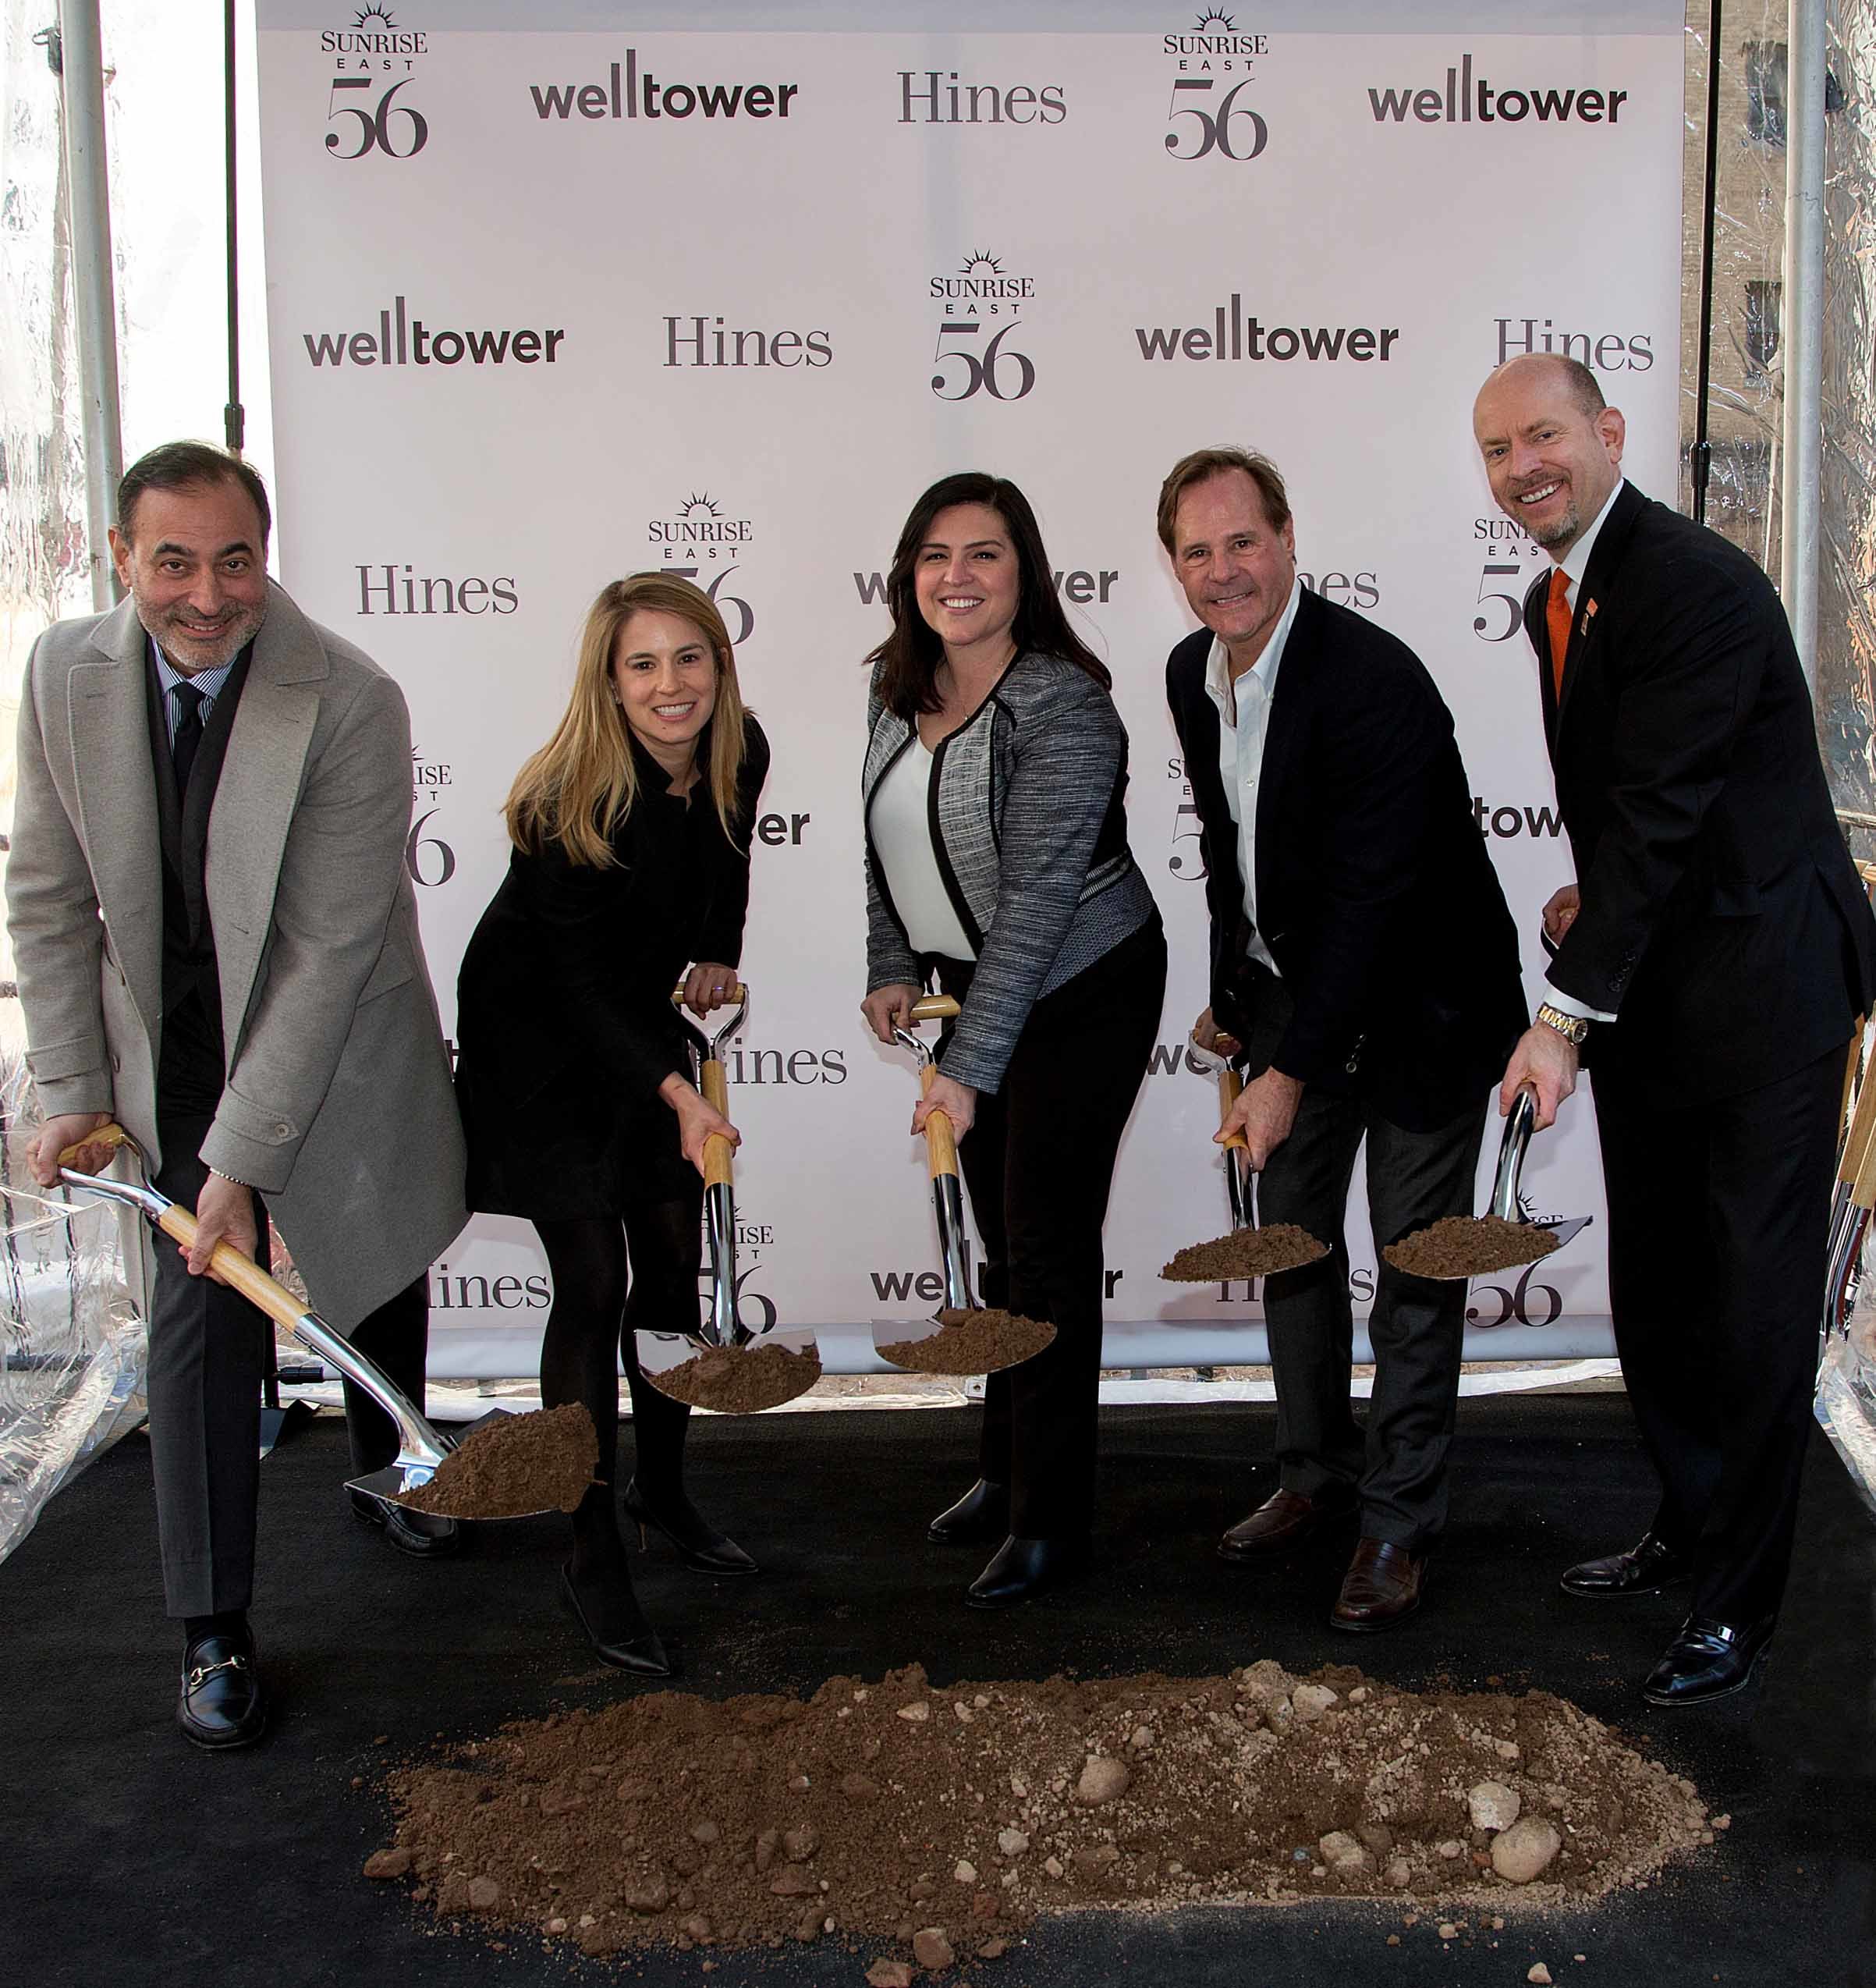 Pictured left to right: Tom DeRosa, CEO and director of Welltower; Sarah Hawkins, Hines managing director; Mercedes Kerr, executive vice president of Welltower; Tommy Craig, Hines senior managing director; and Chris Winkle, CEO of Sunrise Senior Living.